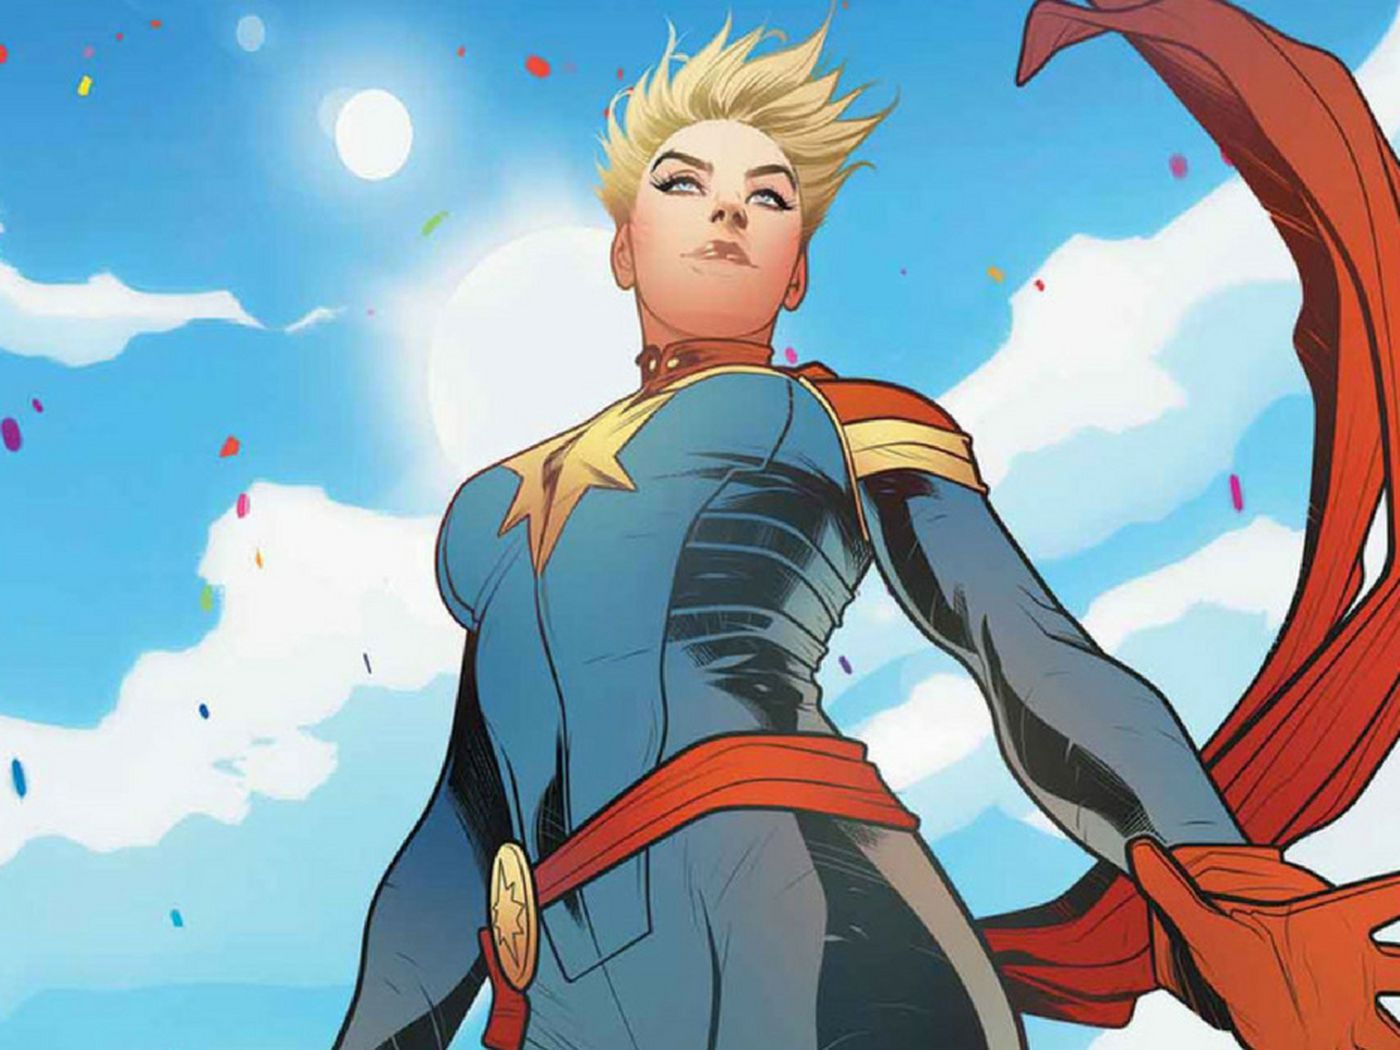 Setting Captain Marvel in the '90s hints at how much she matters